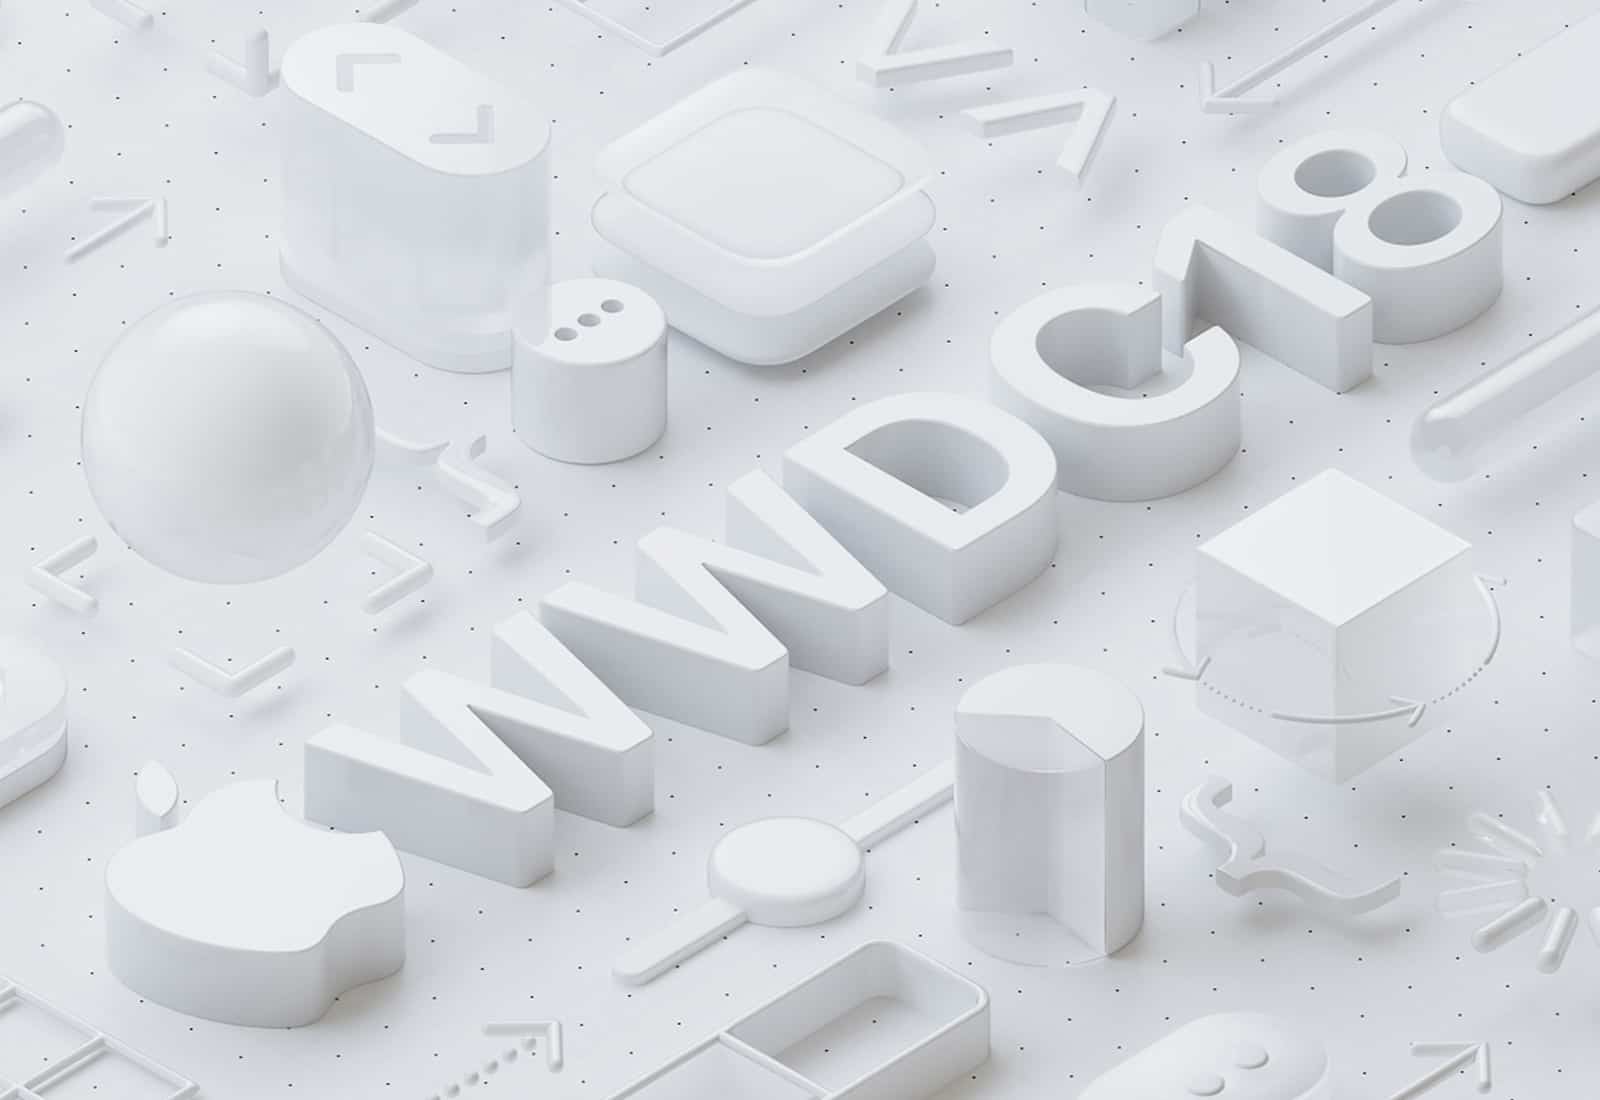 At WWDC 2018, Apple will show us the future of iOS and its other platforms.